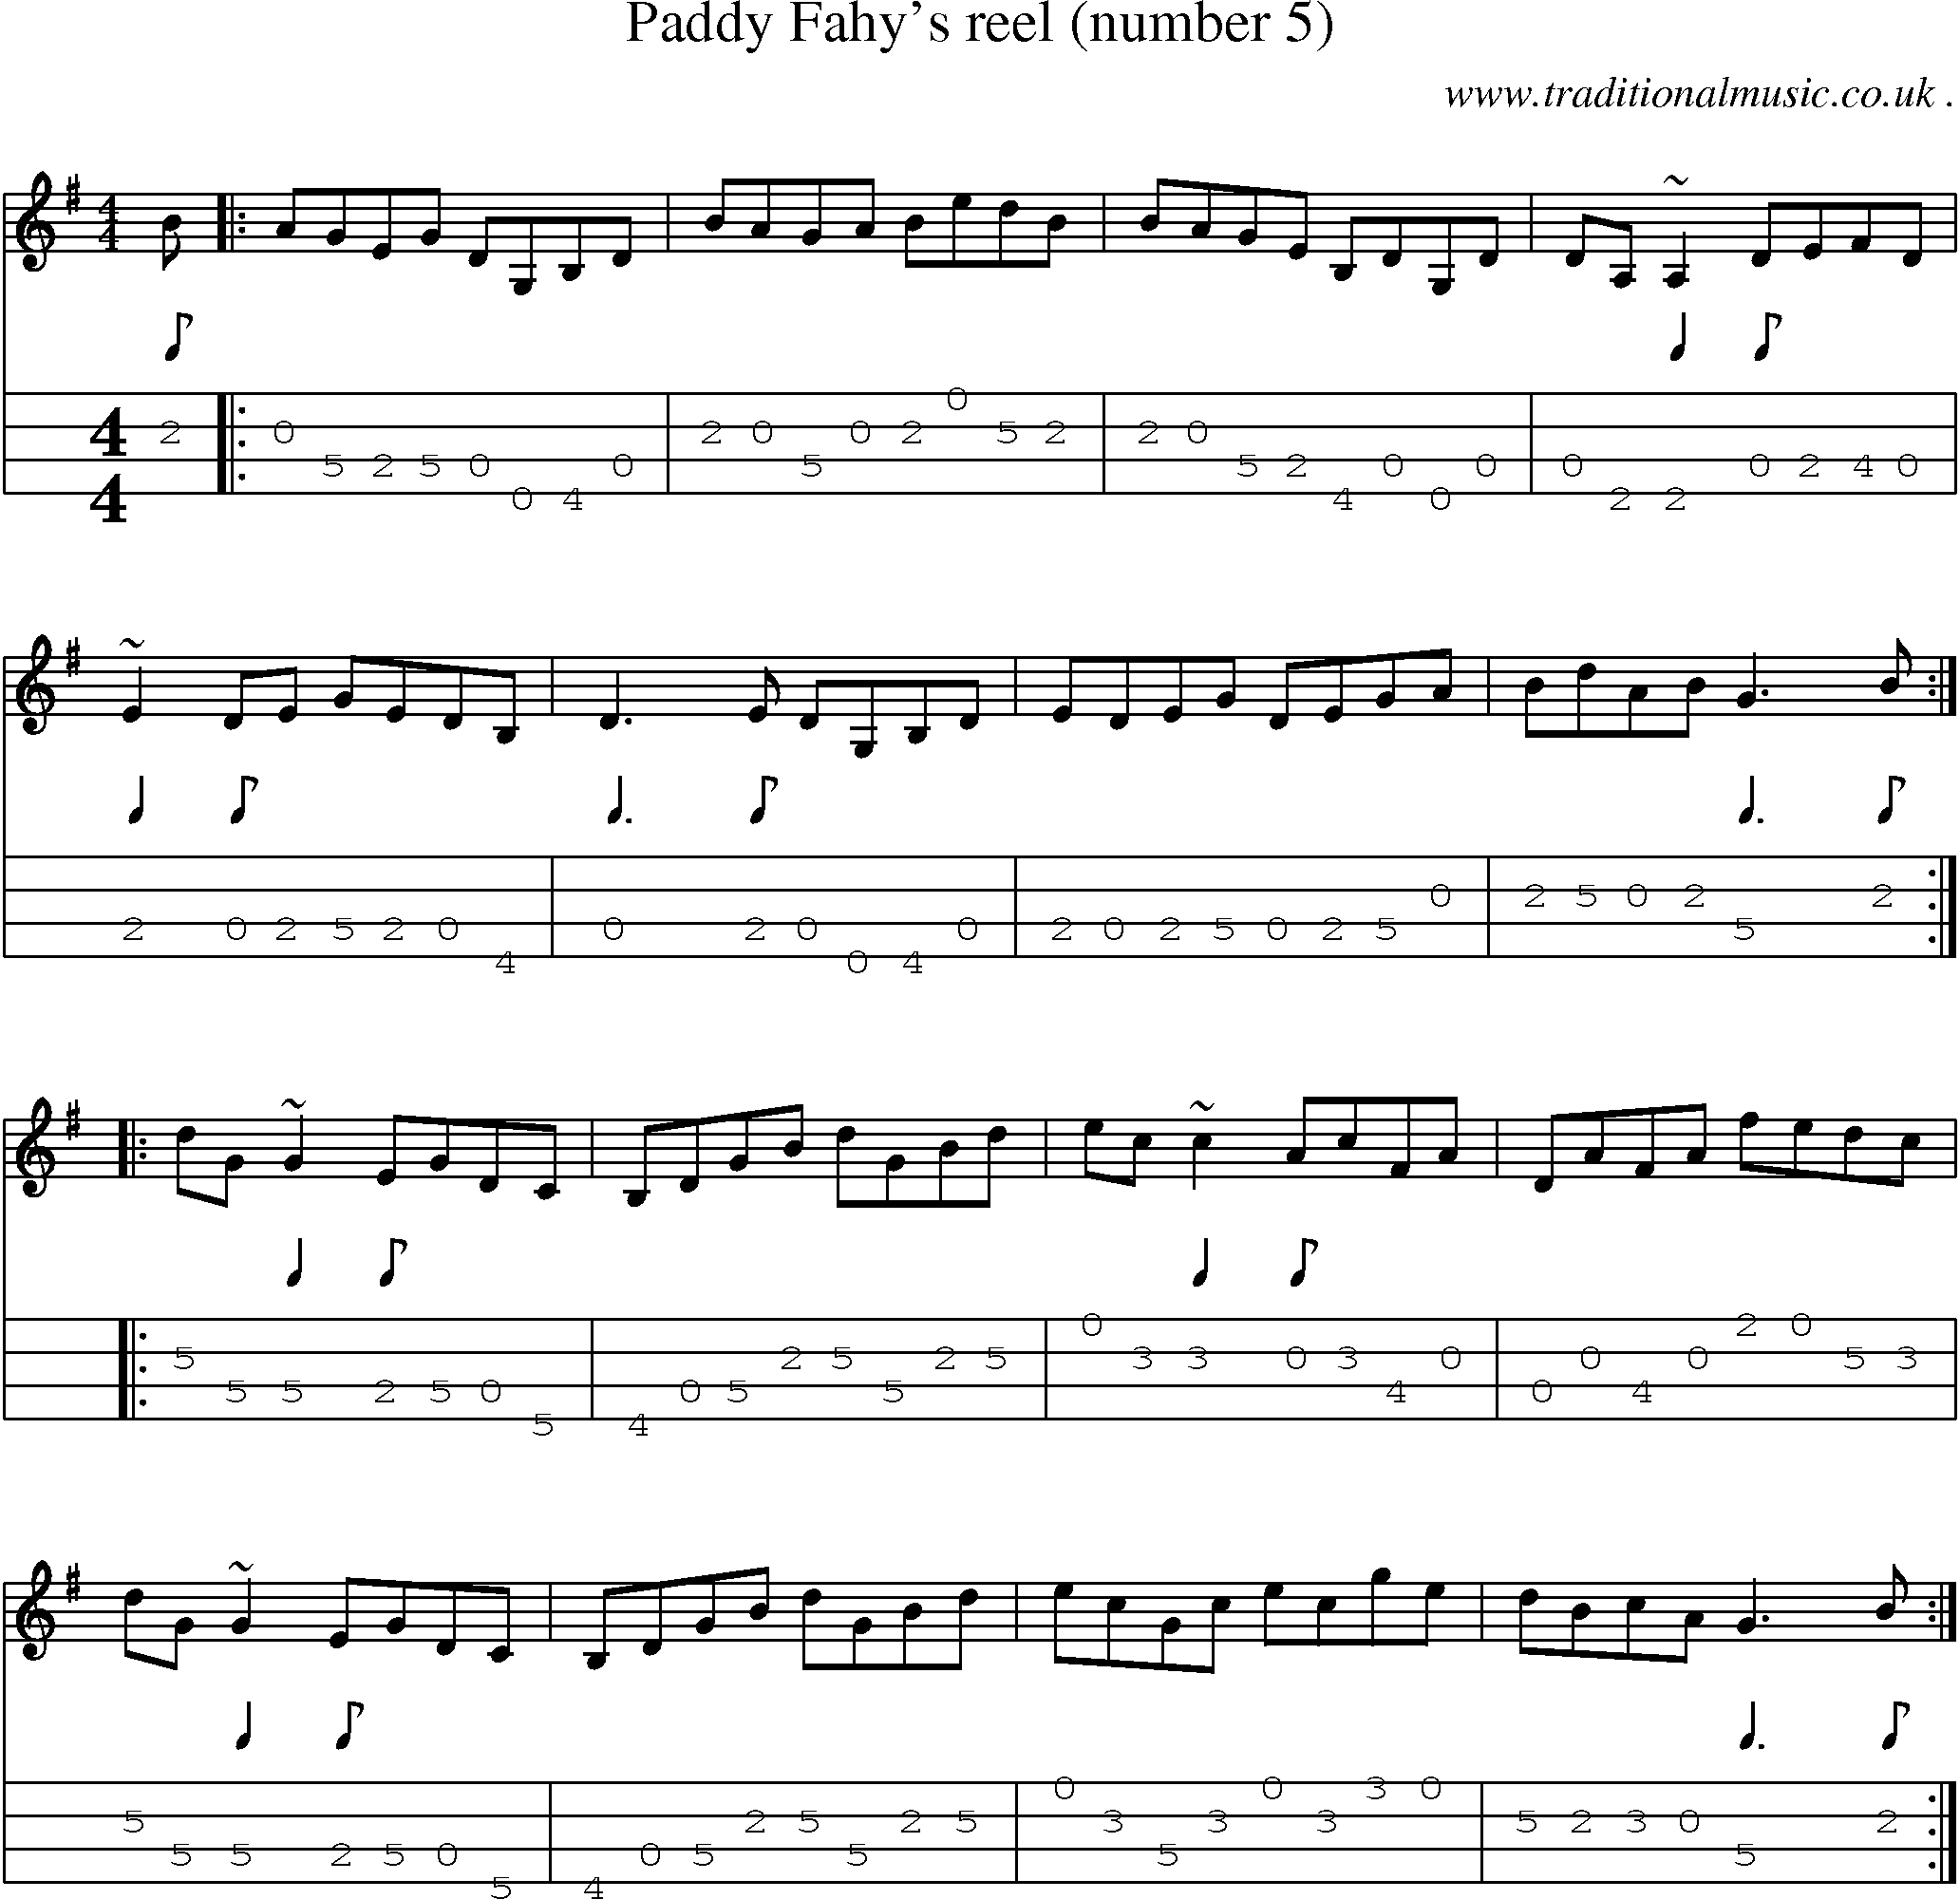 Sheet-music  score, Chords and Mandolin Tabs for Paddy Fahys Reel Number 5